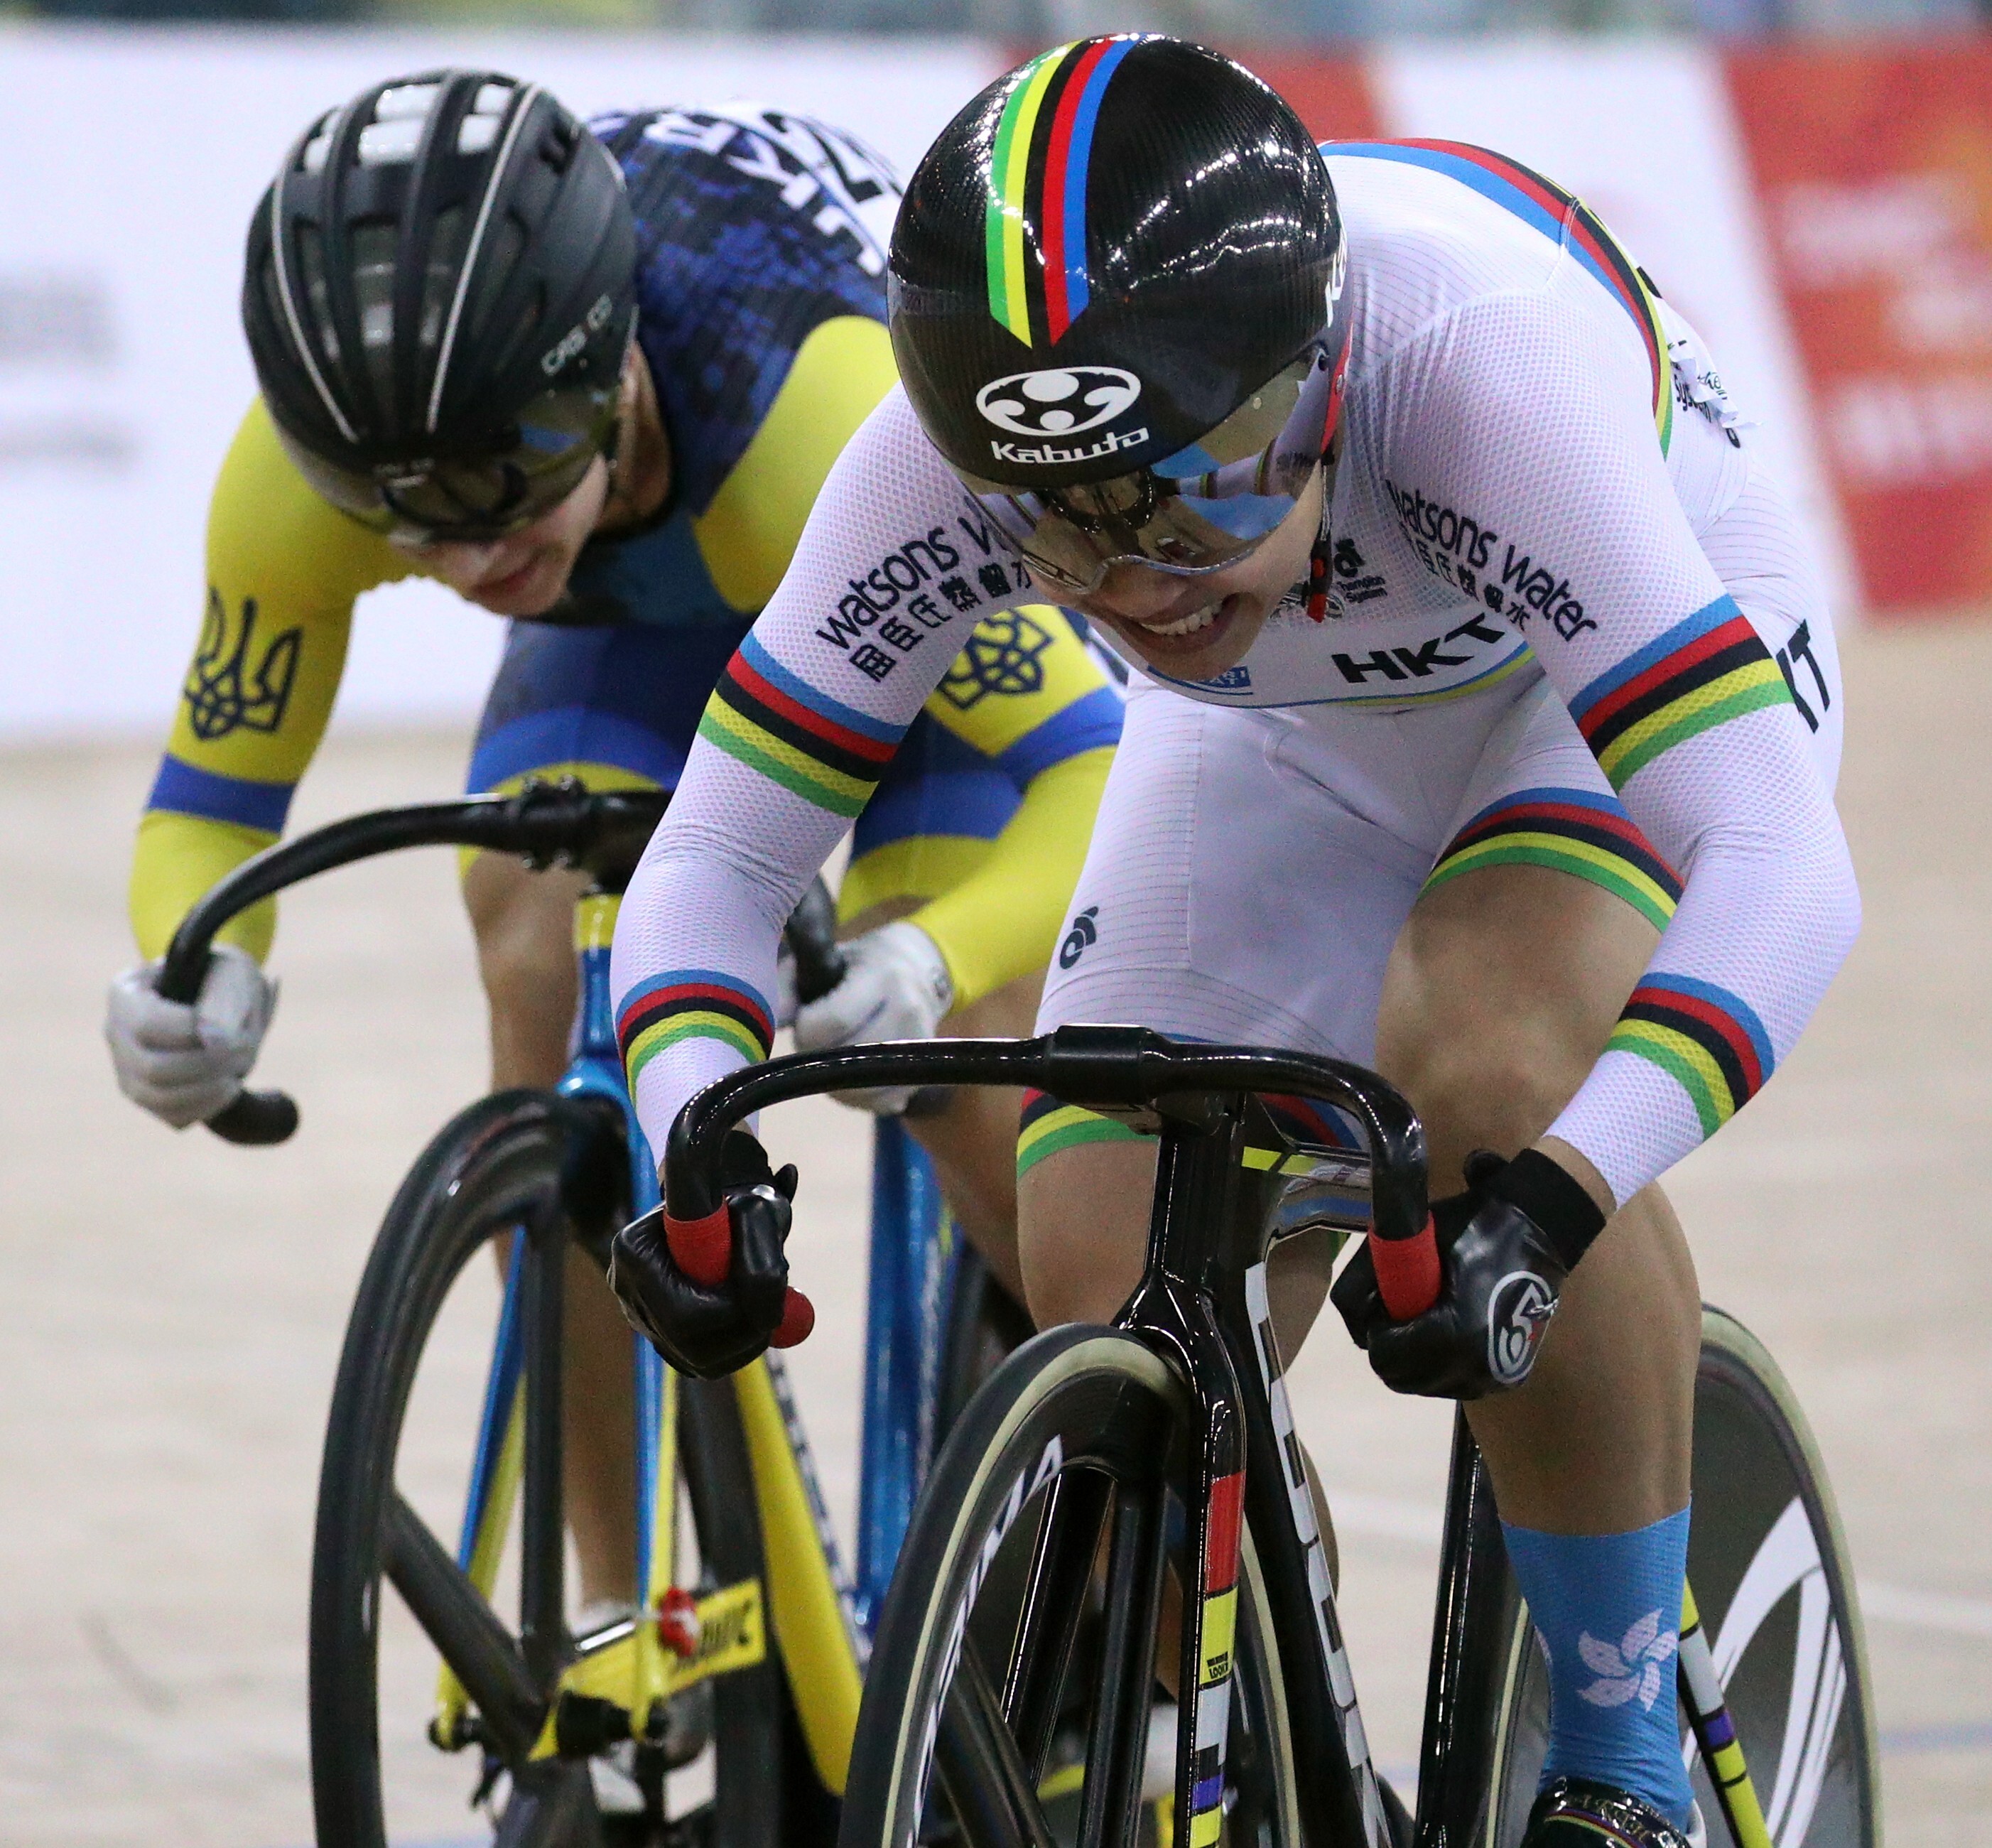 Sarah Lee and Ukraine’s Olena Starikova go at it during the 2019 track cycling World Cup series in Hong Kong. The duo is likely to meet again at the inaugural Nations Cup in Tseung Kwan O. Photo: Winson Wong